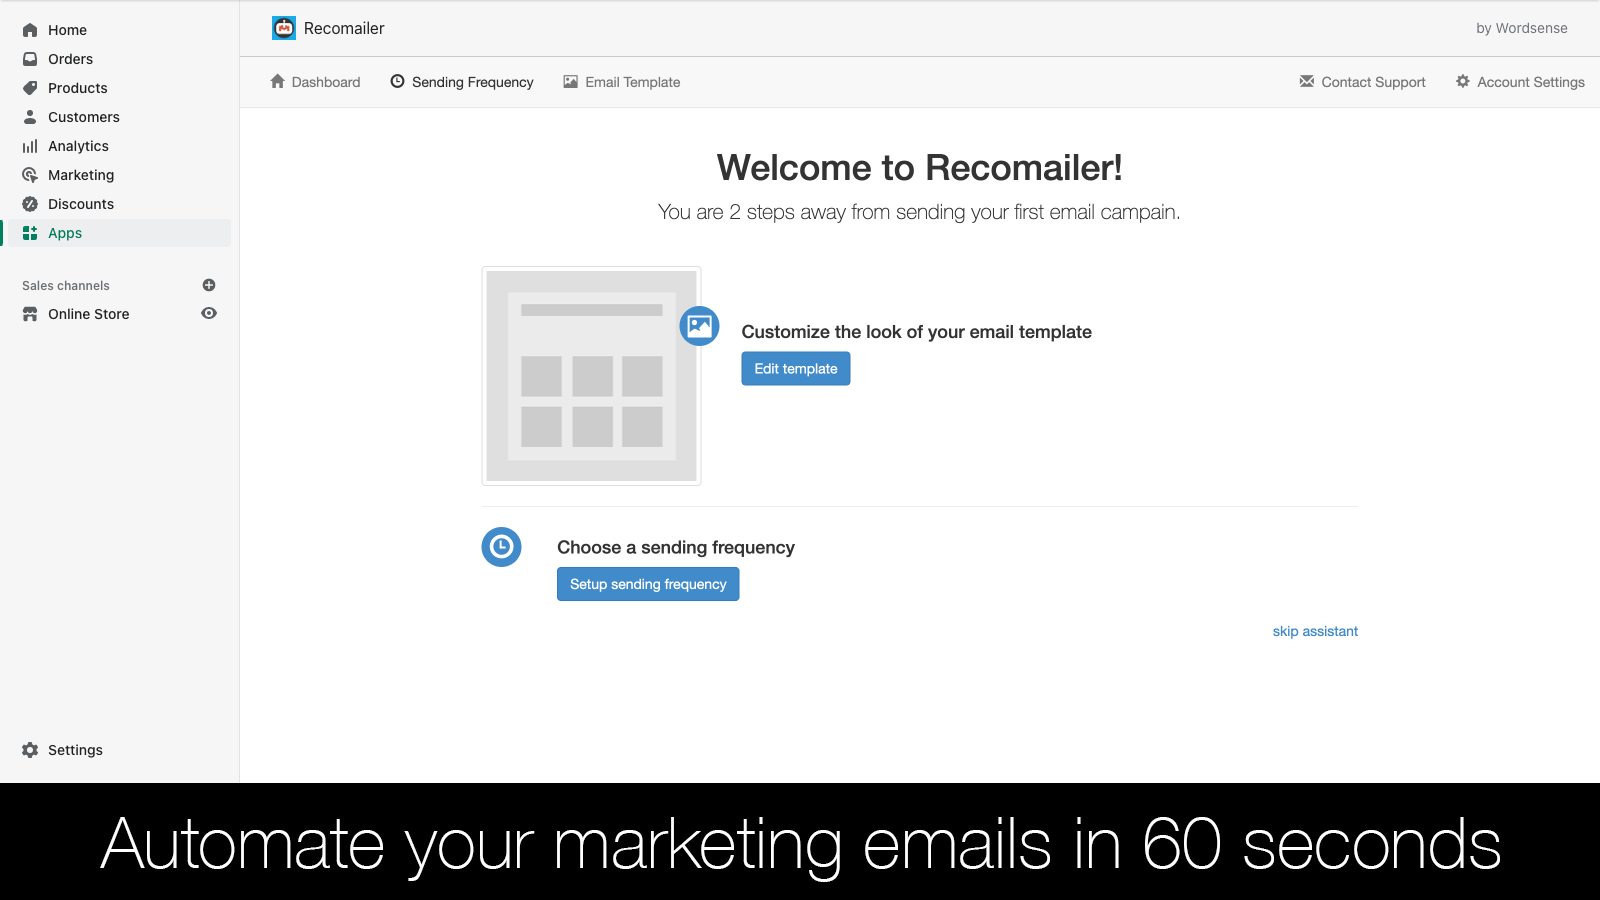 Automate your marketing emails in 60 seconds